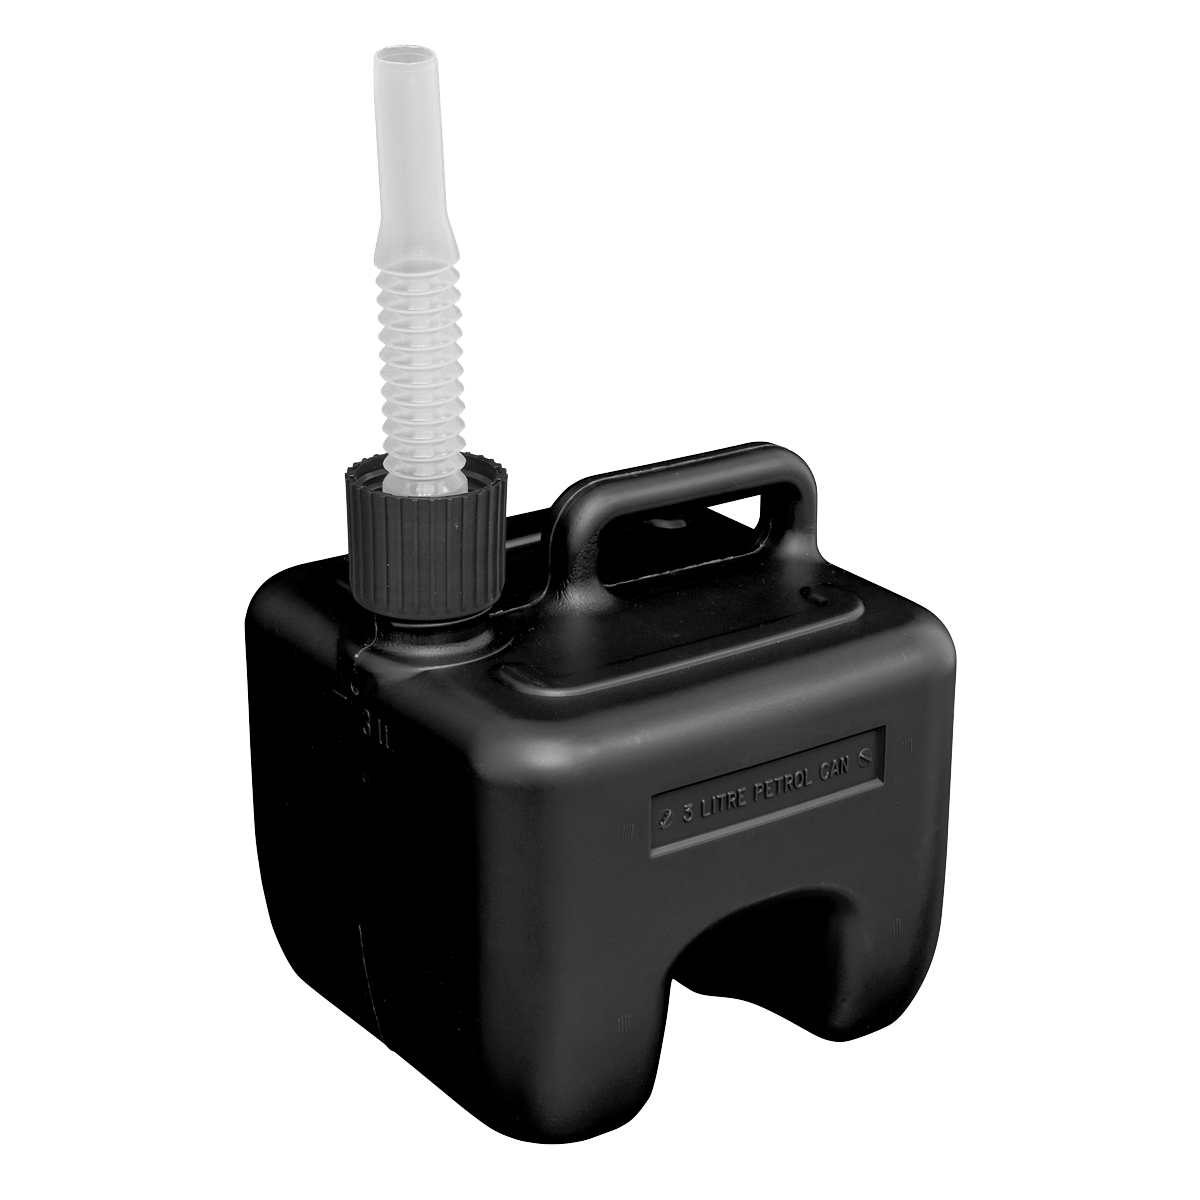 Stackable Fuel Can 3L - Black | 3L Plastic fuel can with safety screw lock cap and flexible spout. | toolforce.ie